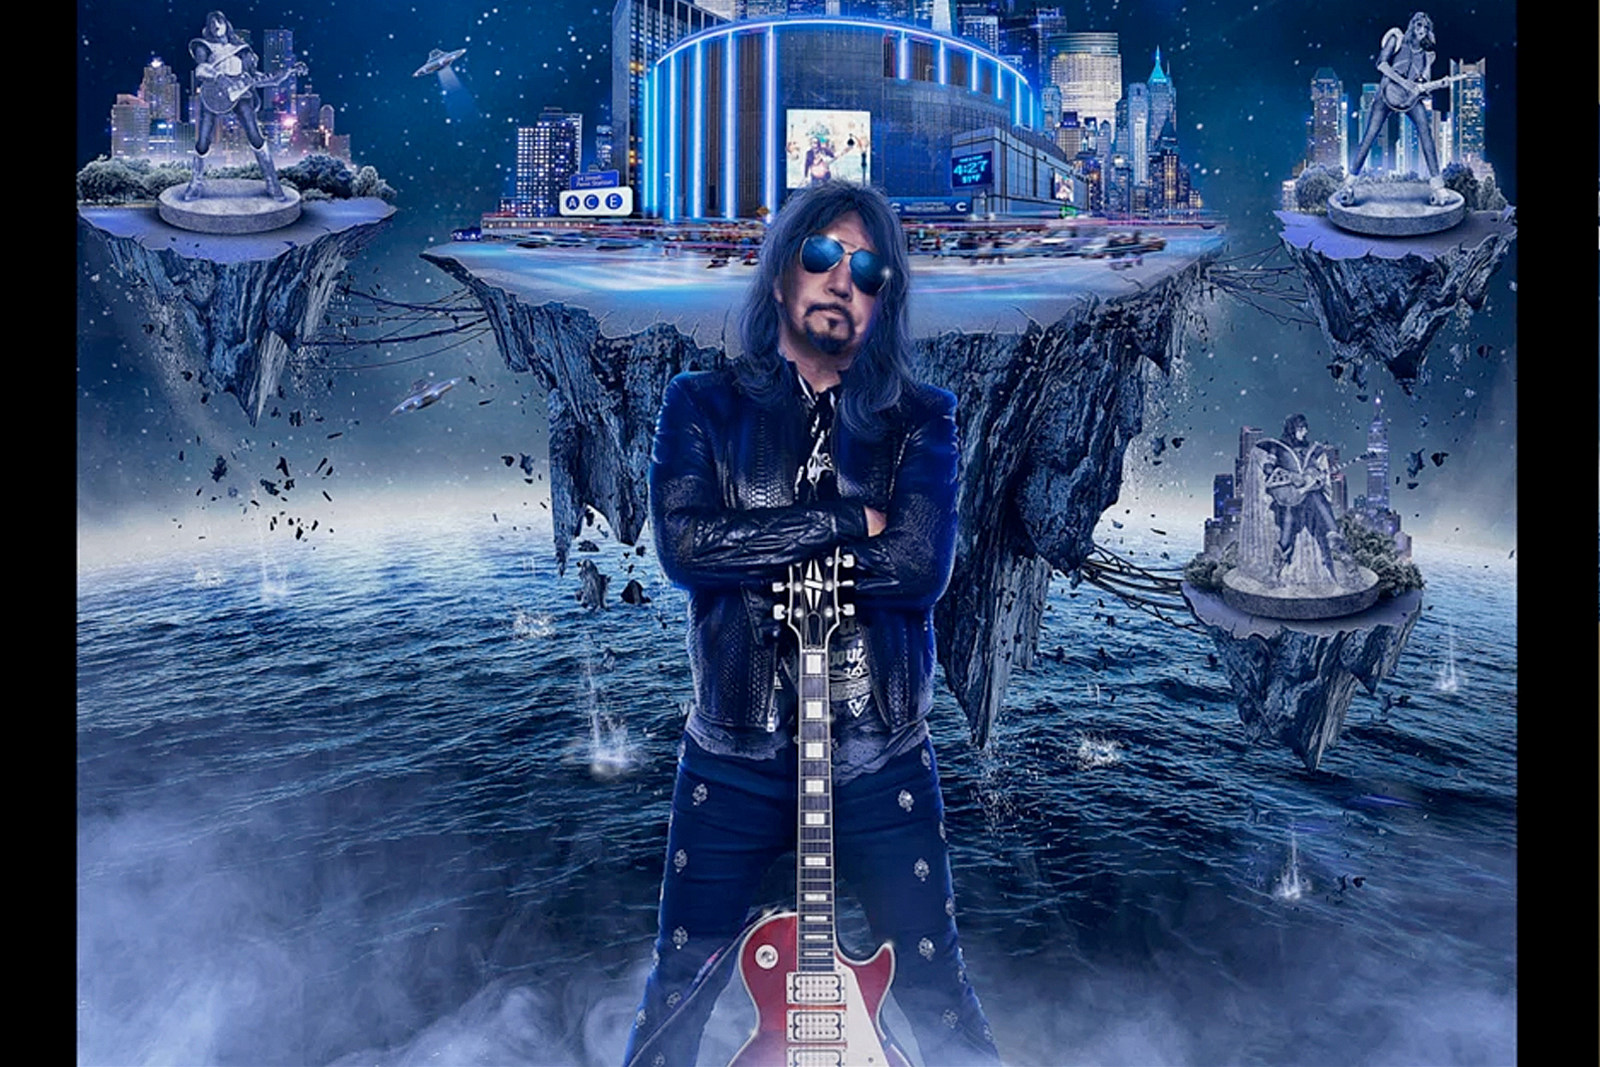 Ace Frehley Recruits All-Stars for 'Origins, Vol. 2' Covers Album